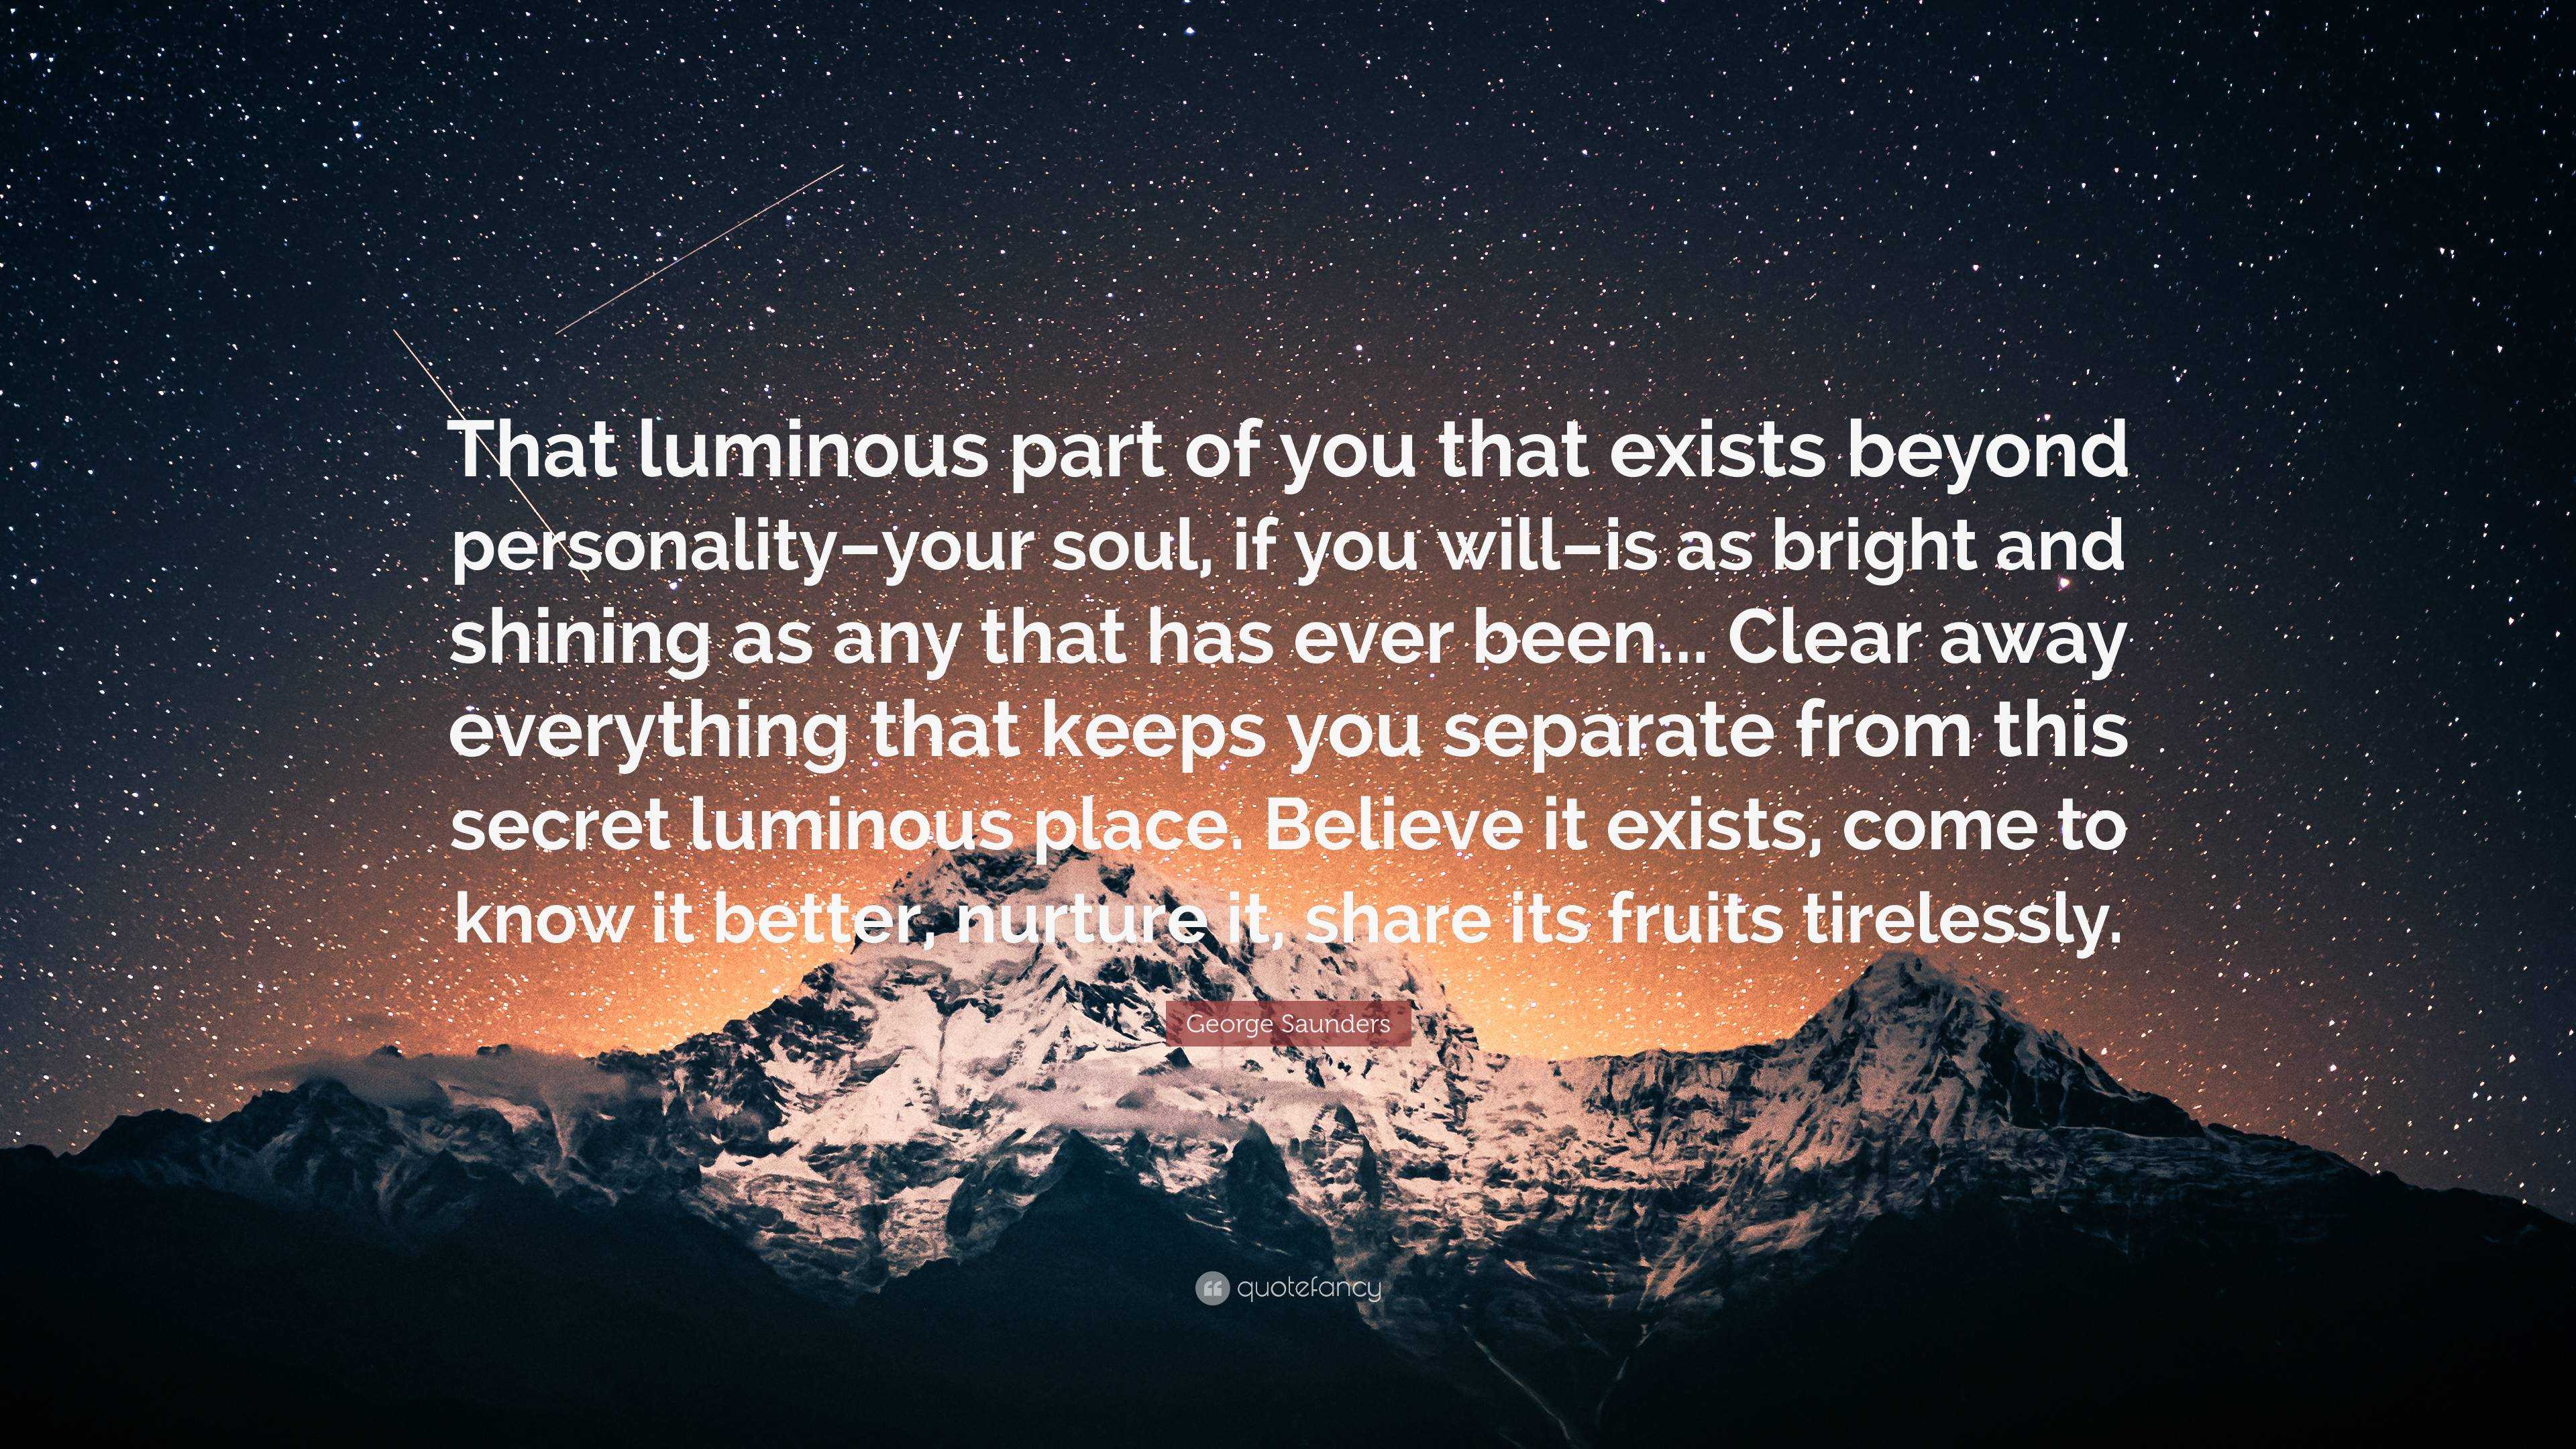 George Saunders Quote: “That luminous part of you that exists beyond